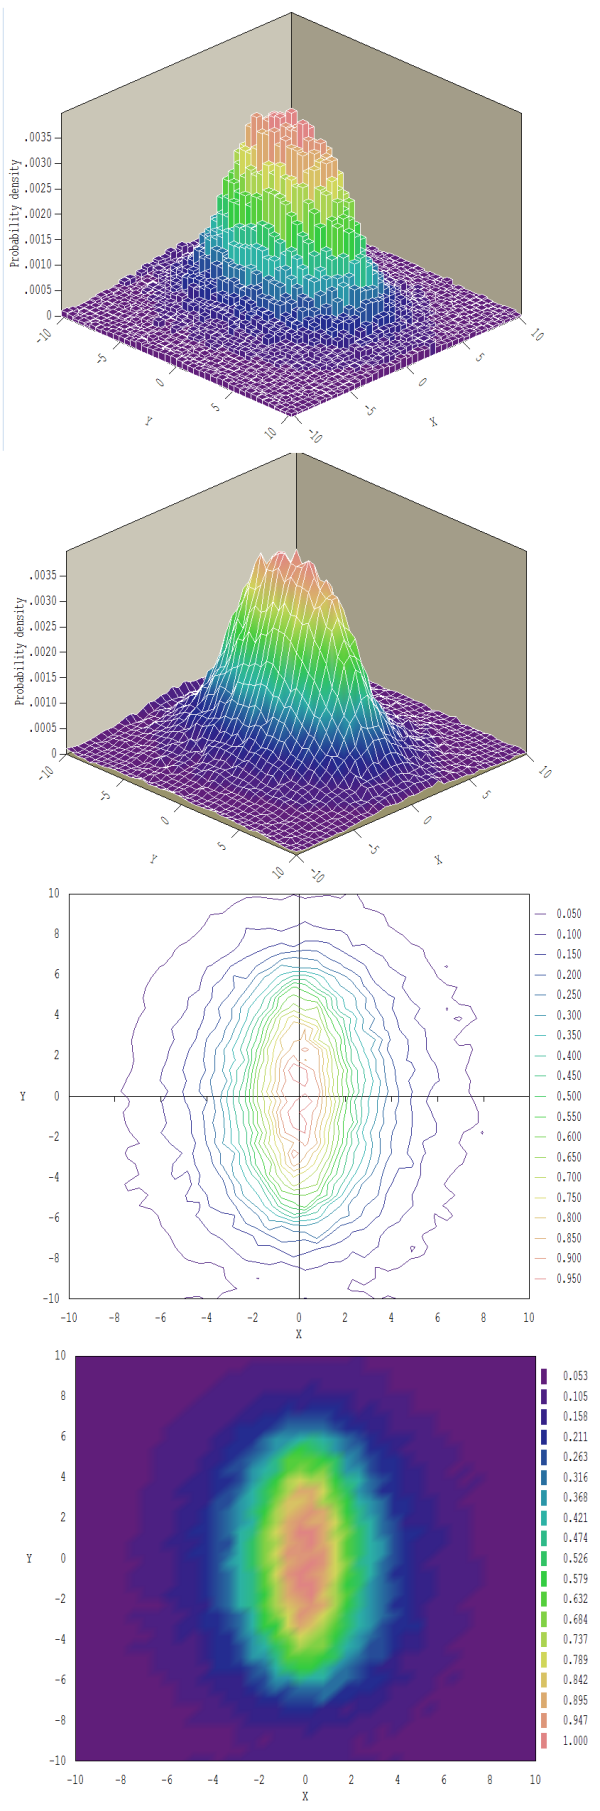 Plot styles for the 2D histogram type in GenDist